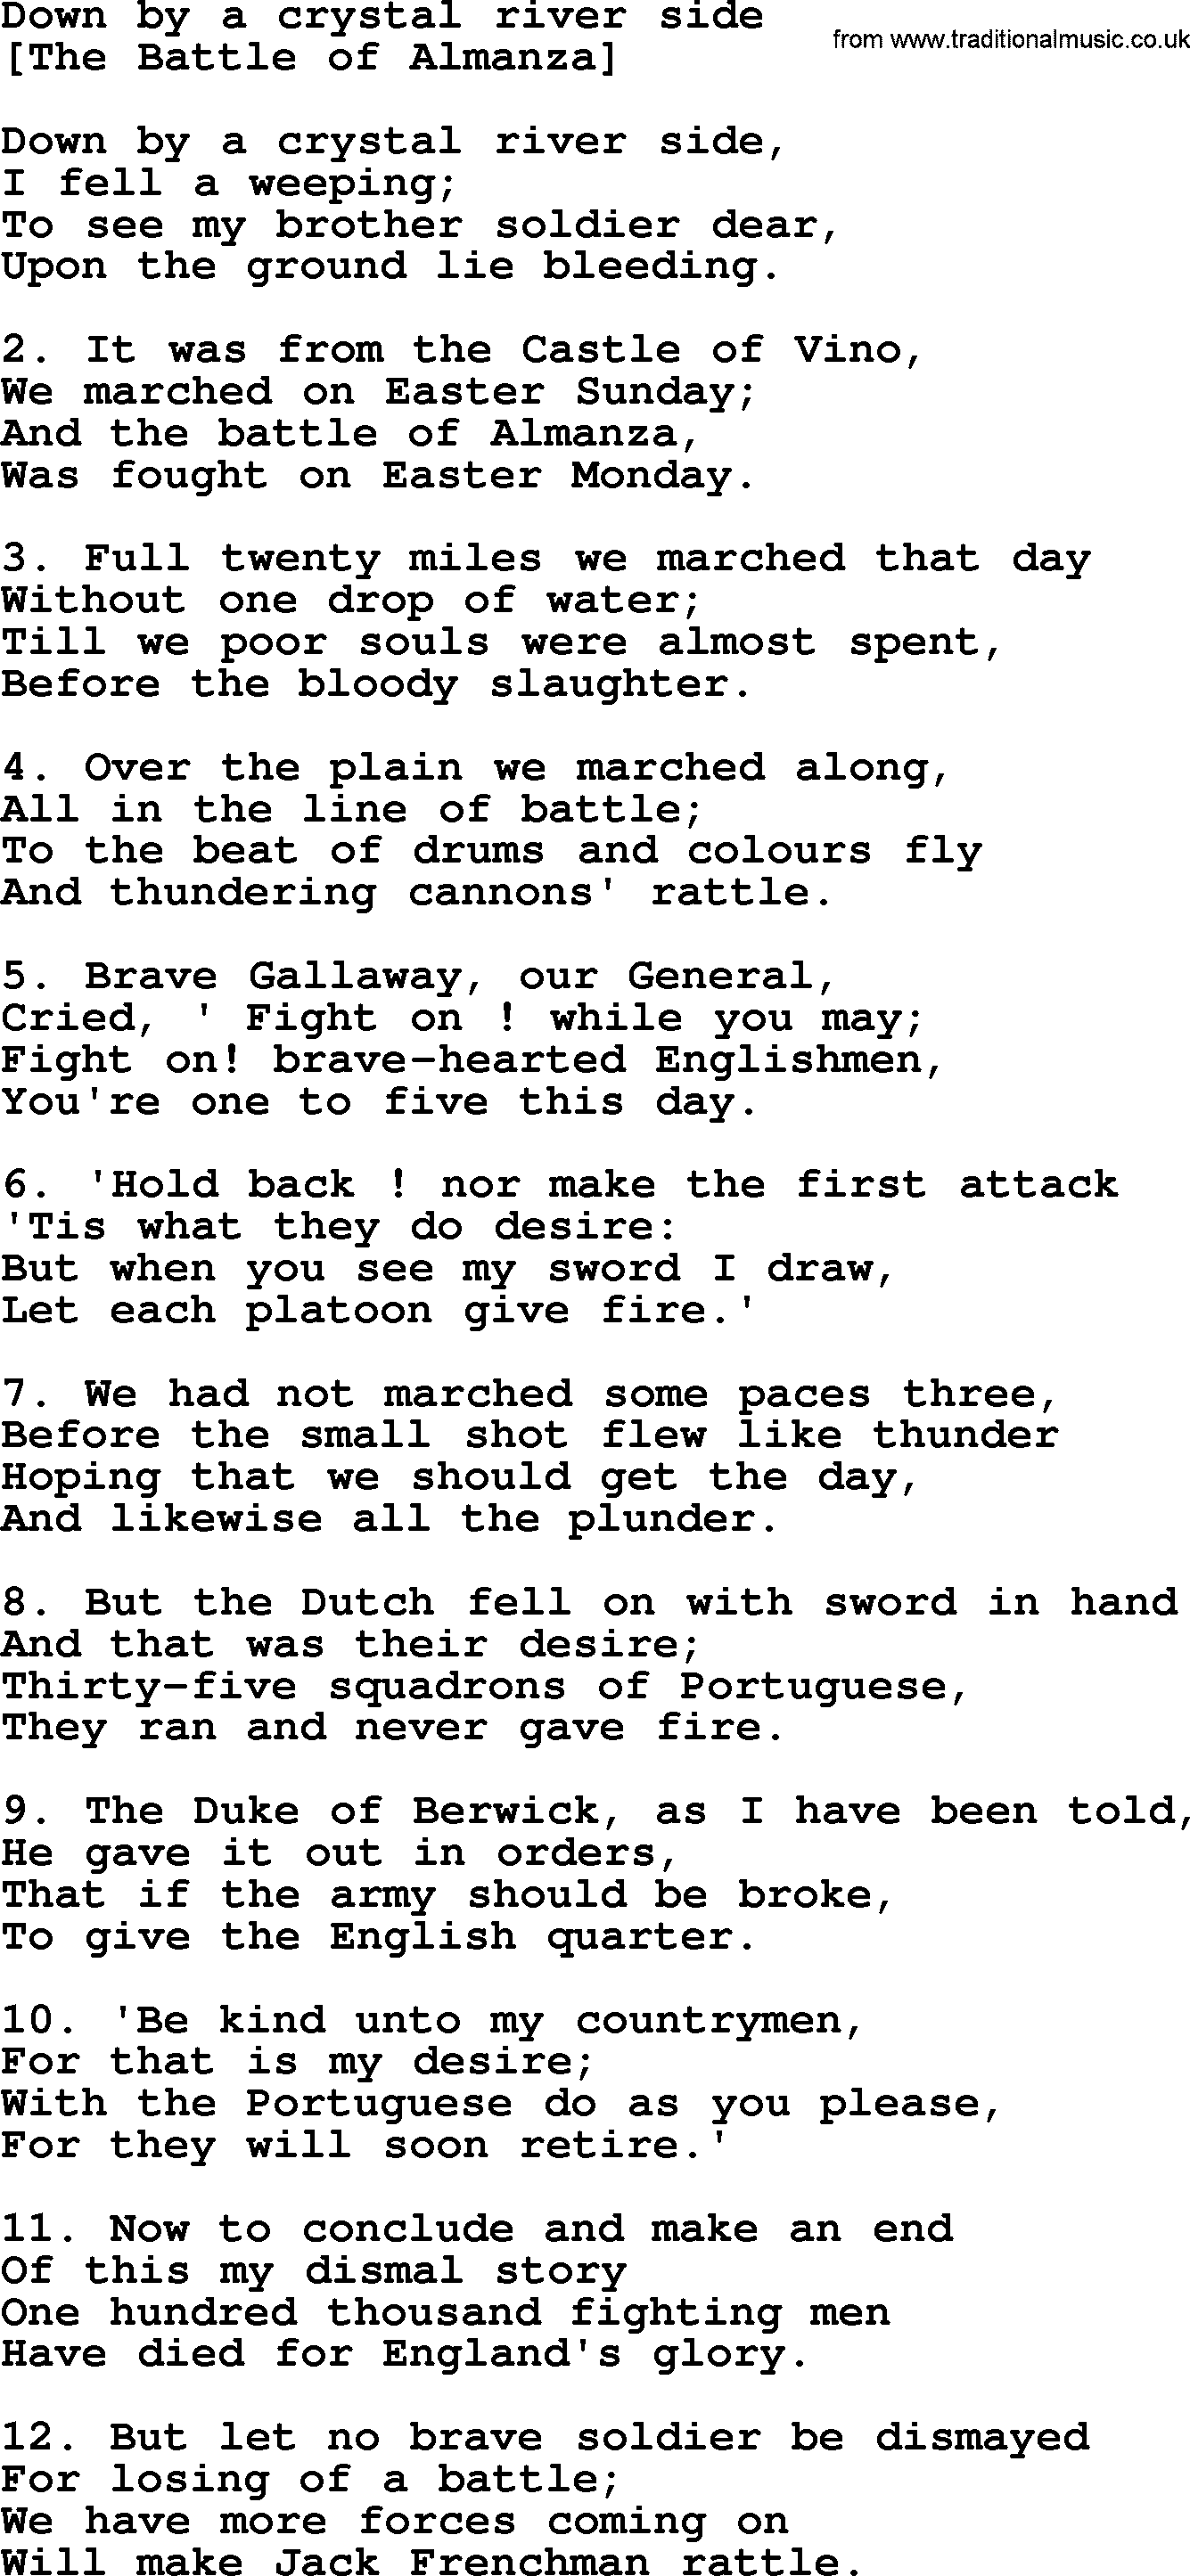 Old English Song: Down By A Crystal River Side lyrics